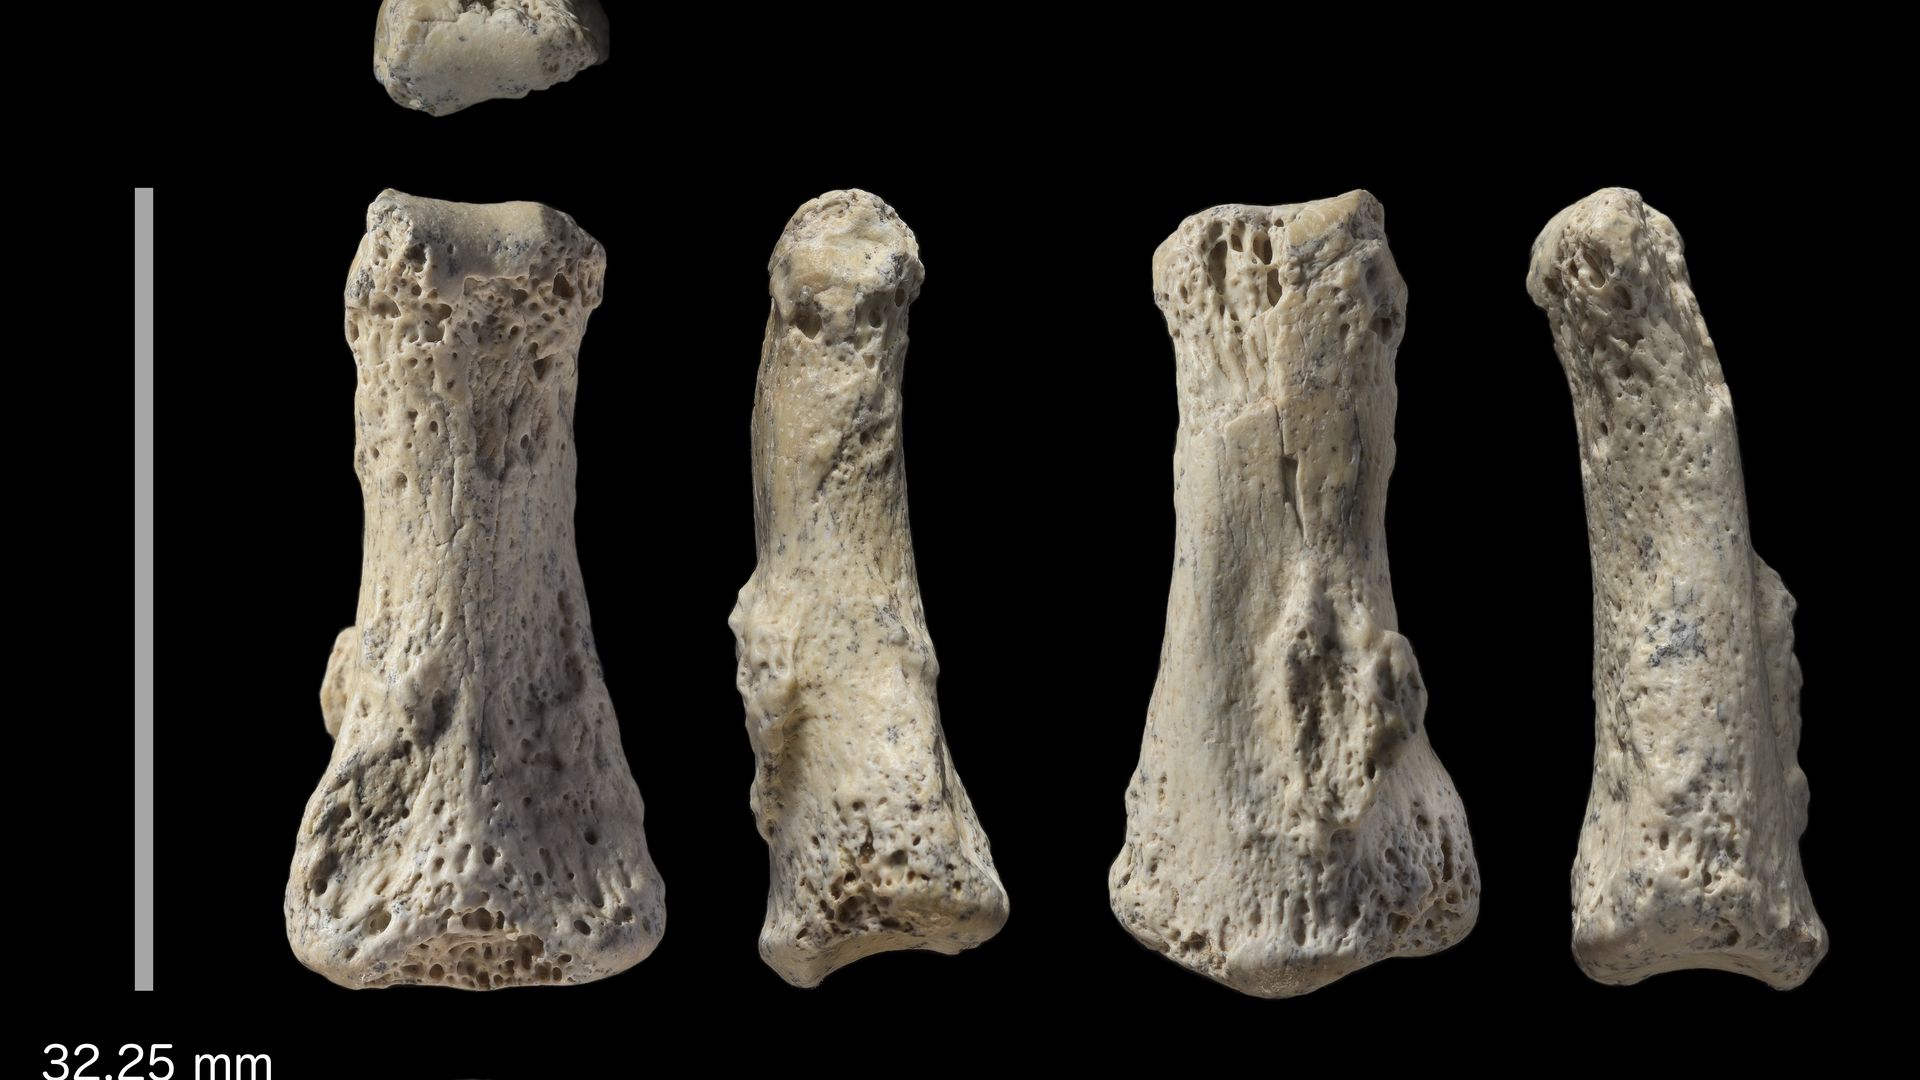 Fossil finger bone of what scientists believe is a Homo sapiens from the Al Wusta site in Saudi Arabia.